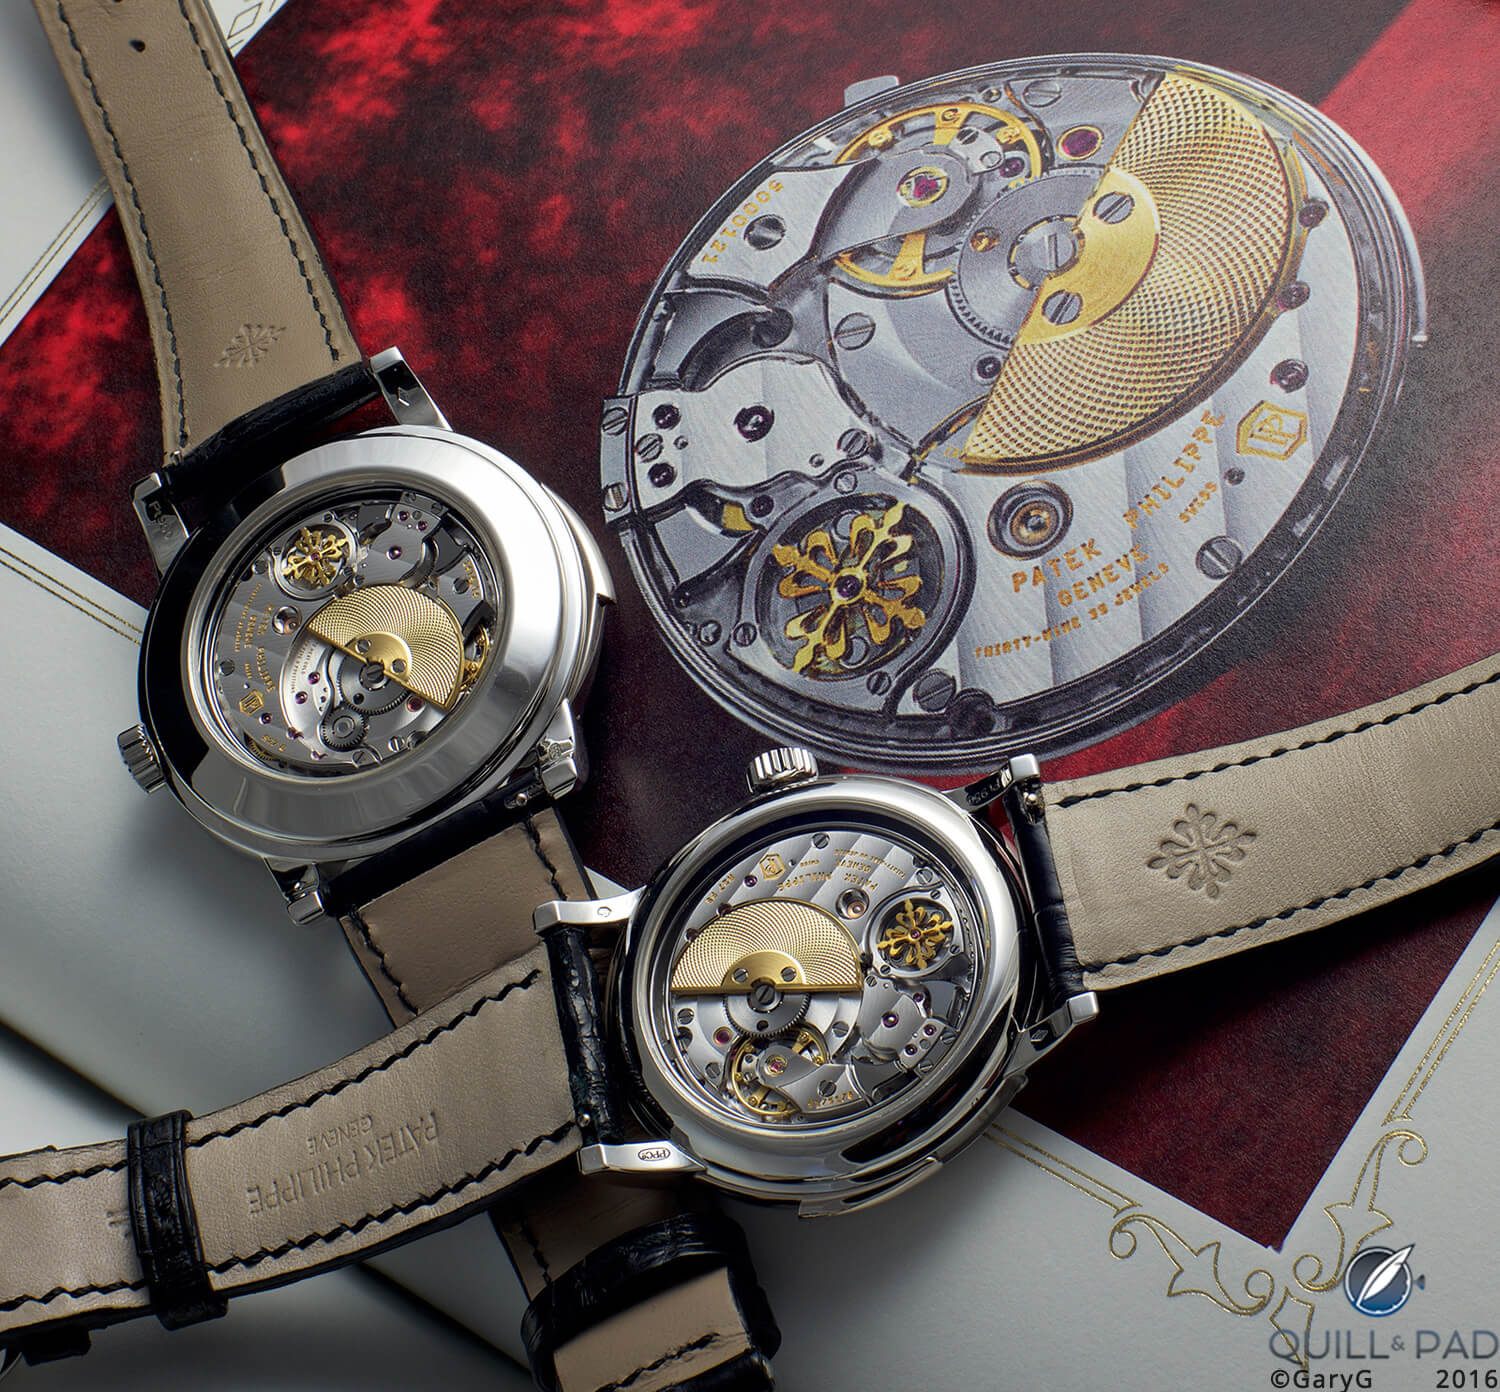 Movement view, Patek Philippe 5074P and 5078P minute repeaters